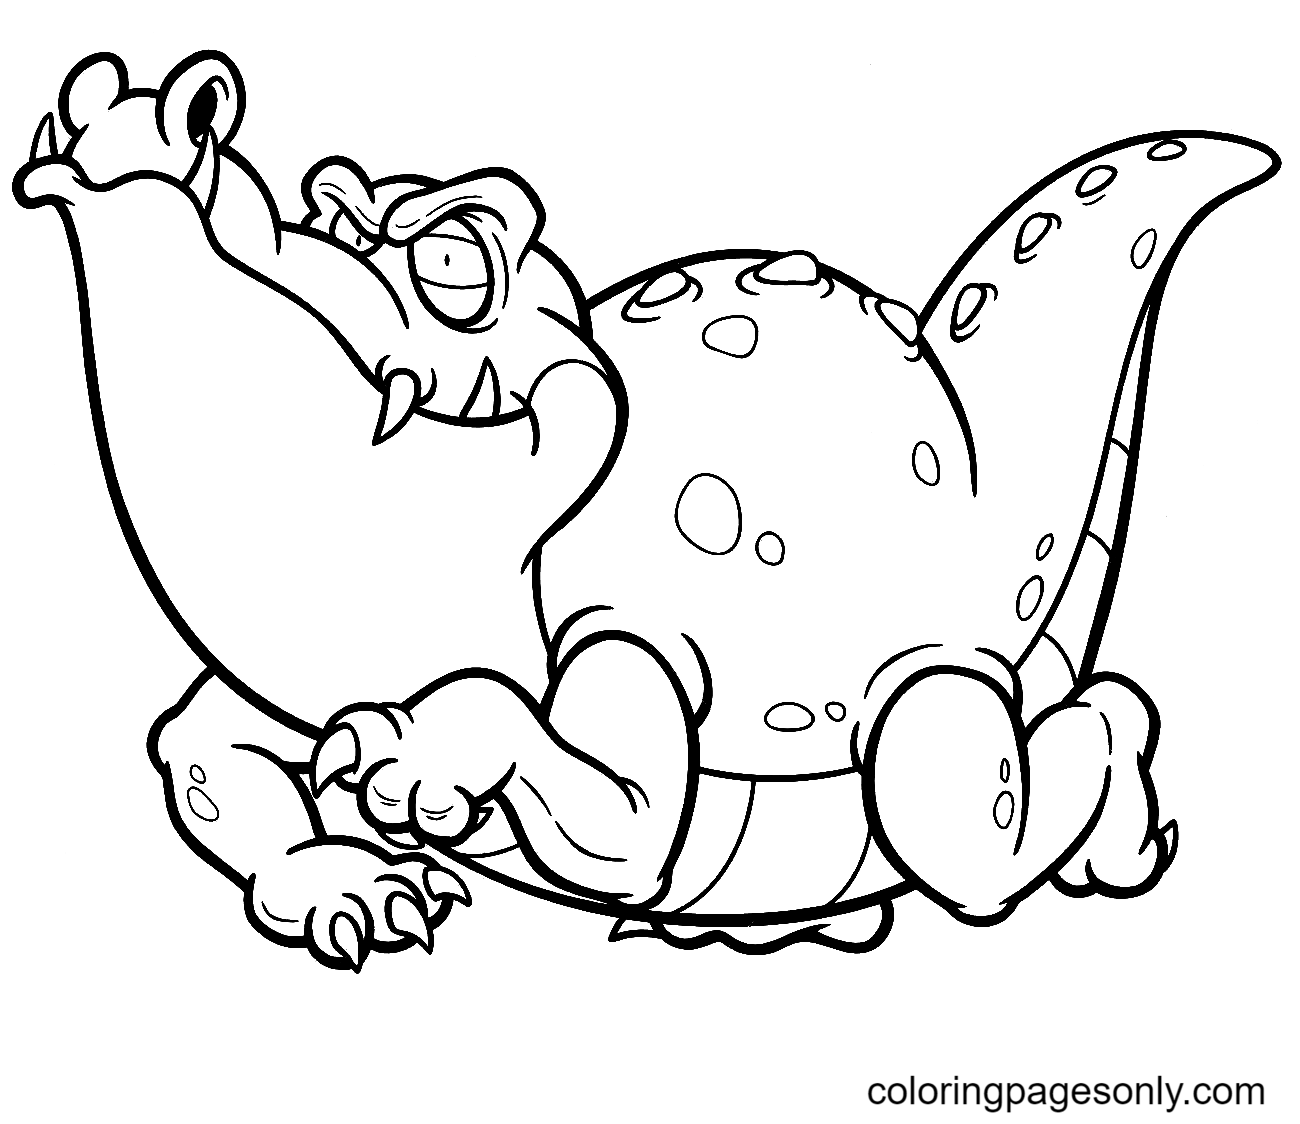 Angry Alligator Coloring Pages